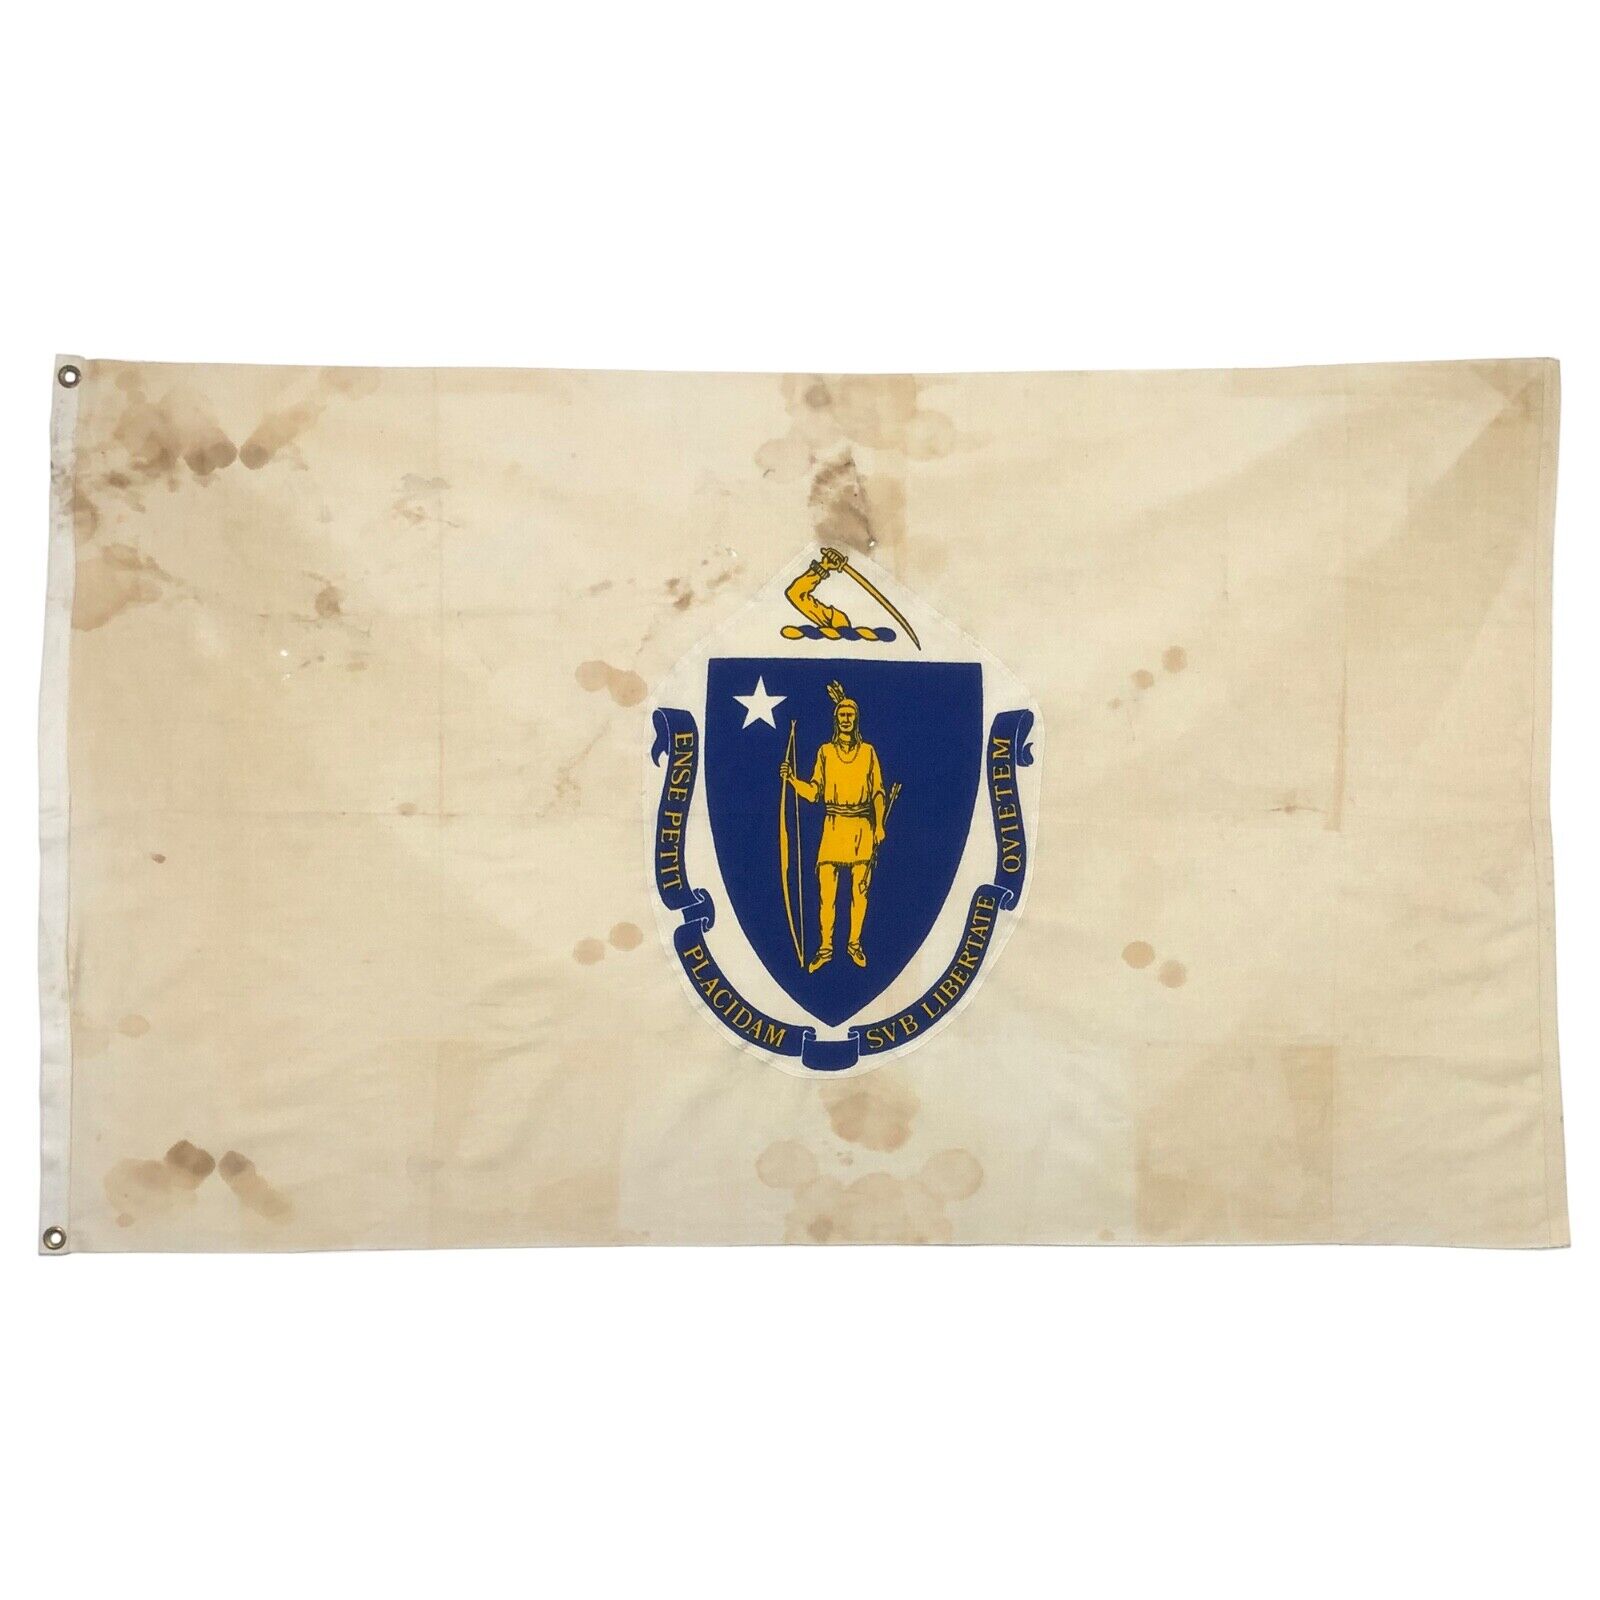 Vintage Cotton Massachusetts State Flag Old Art Cloth Native American Indian USA